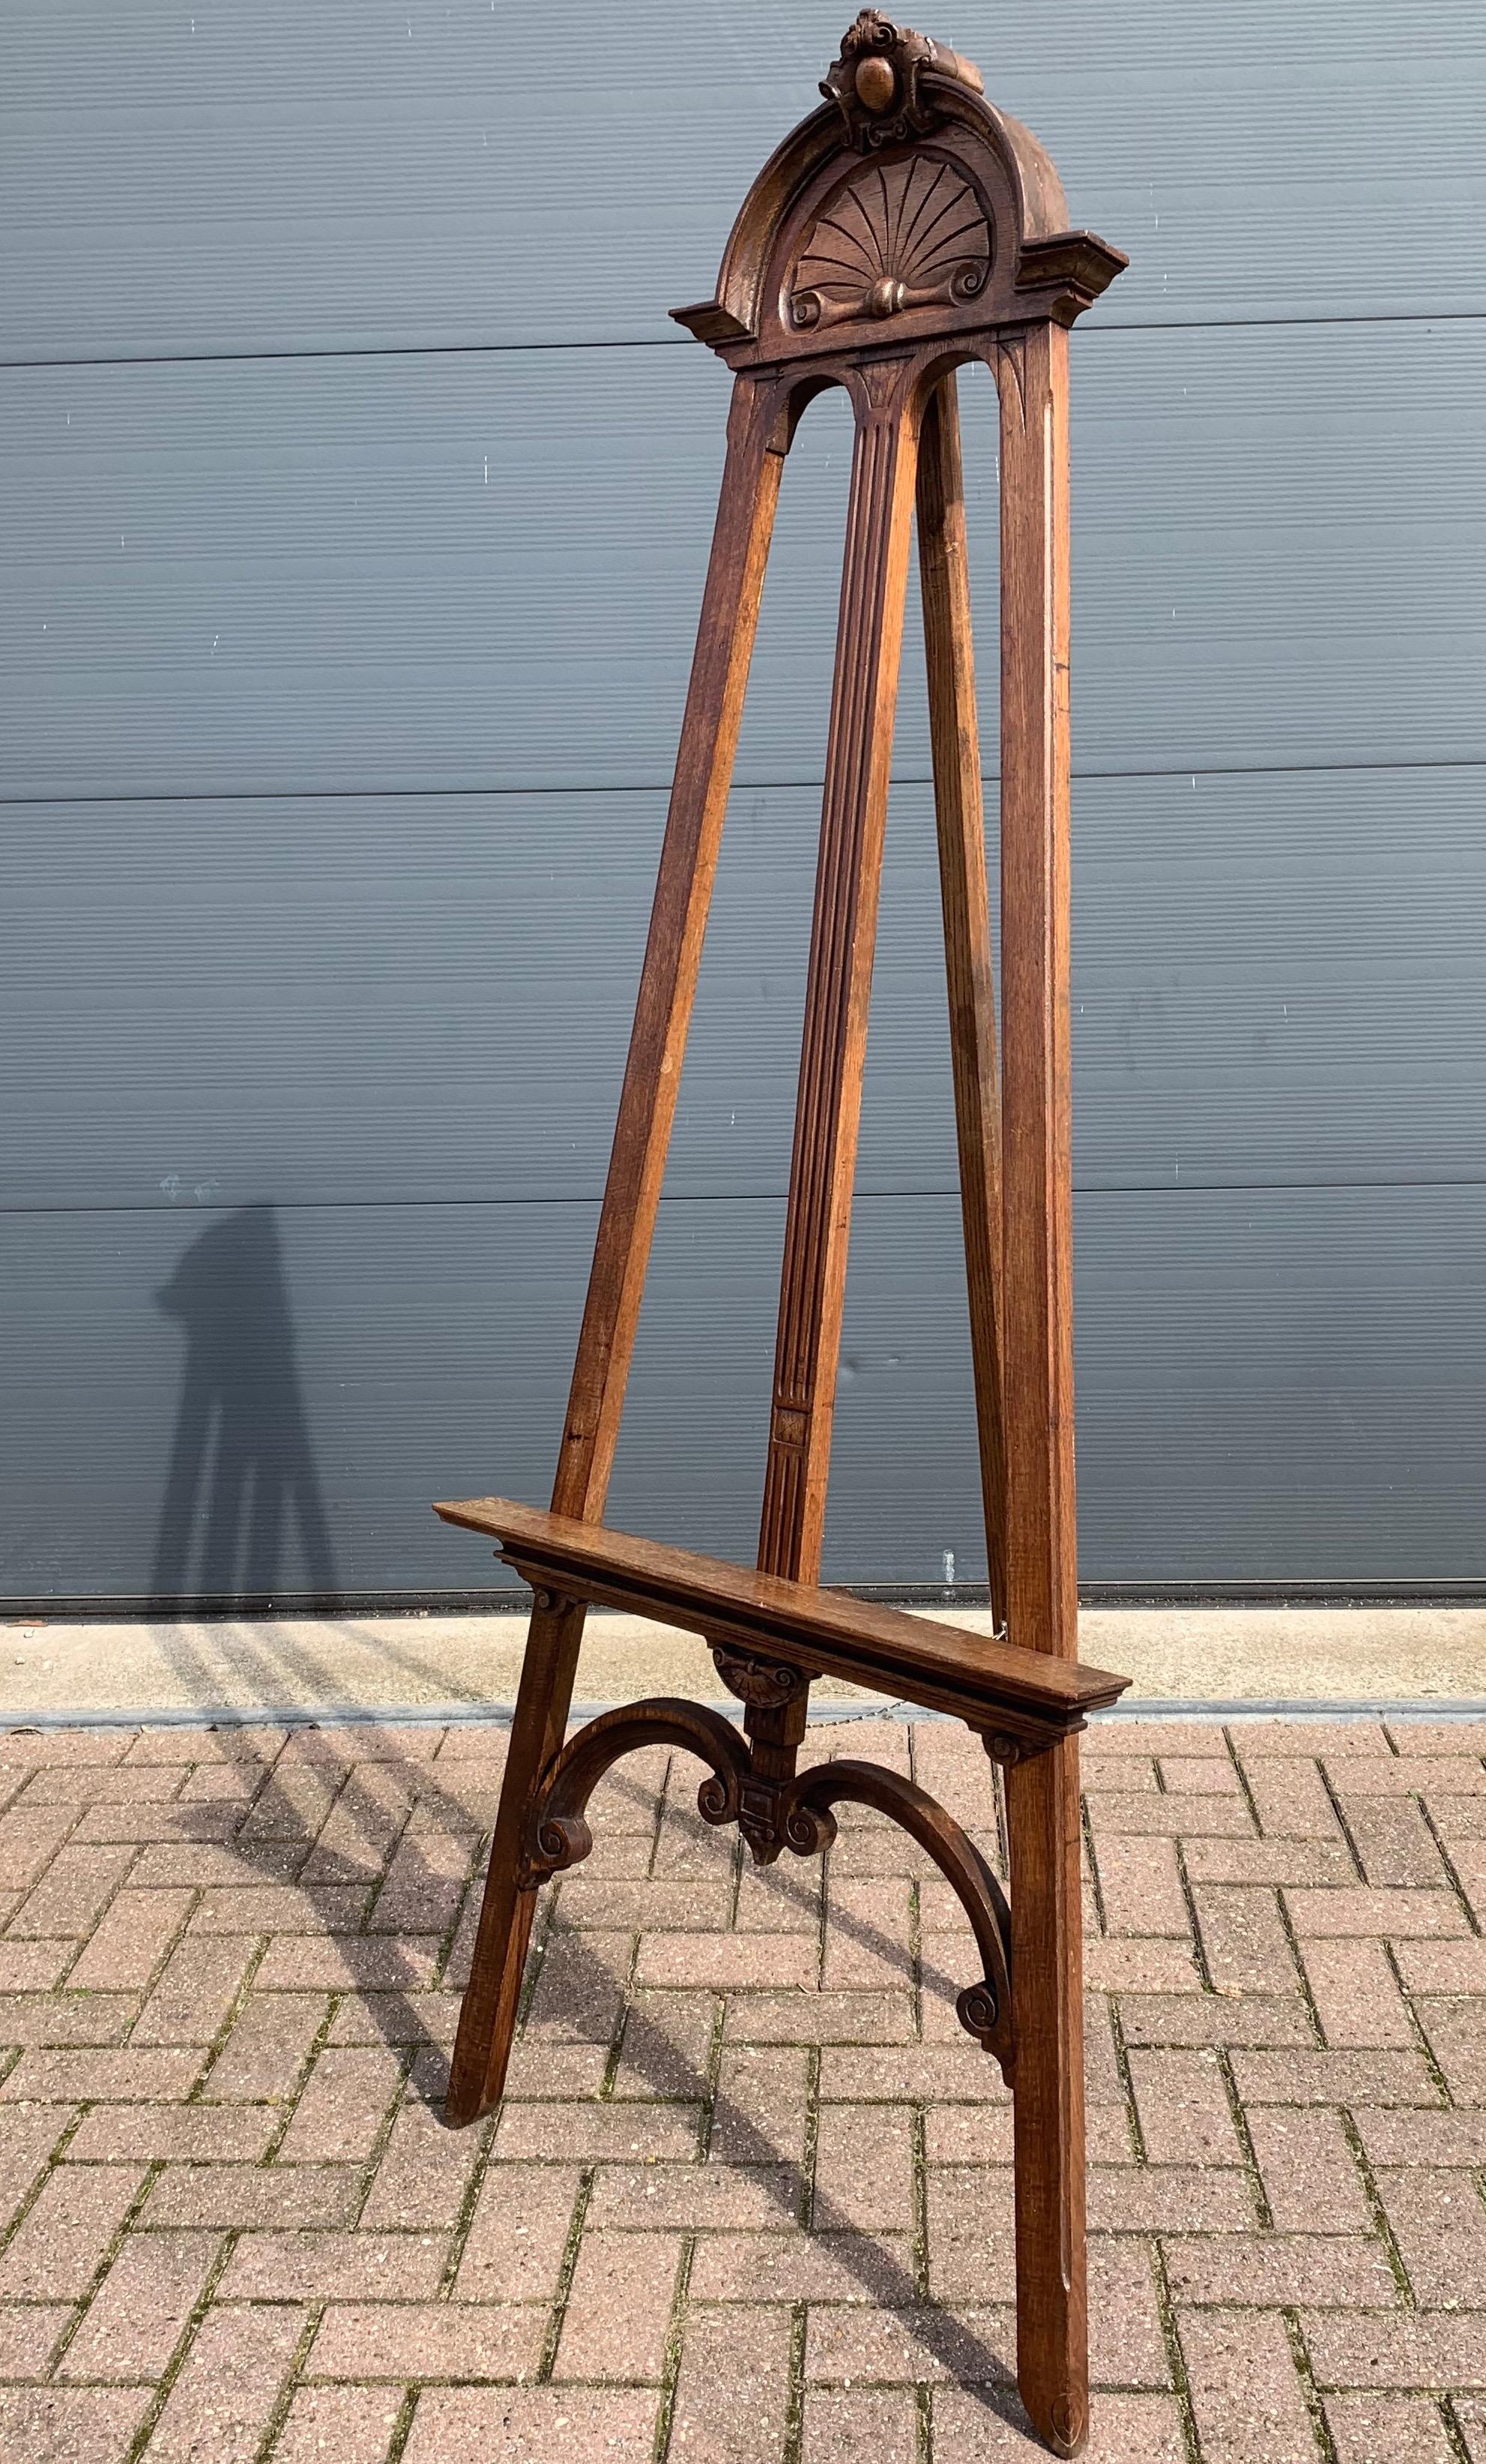 19th Century Large Antique Classical Style Studio or Gallery Easel / Painting Display Stand